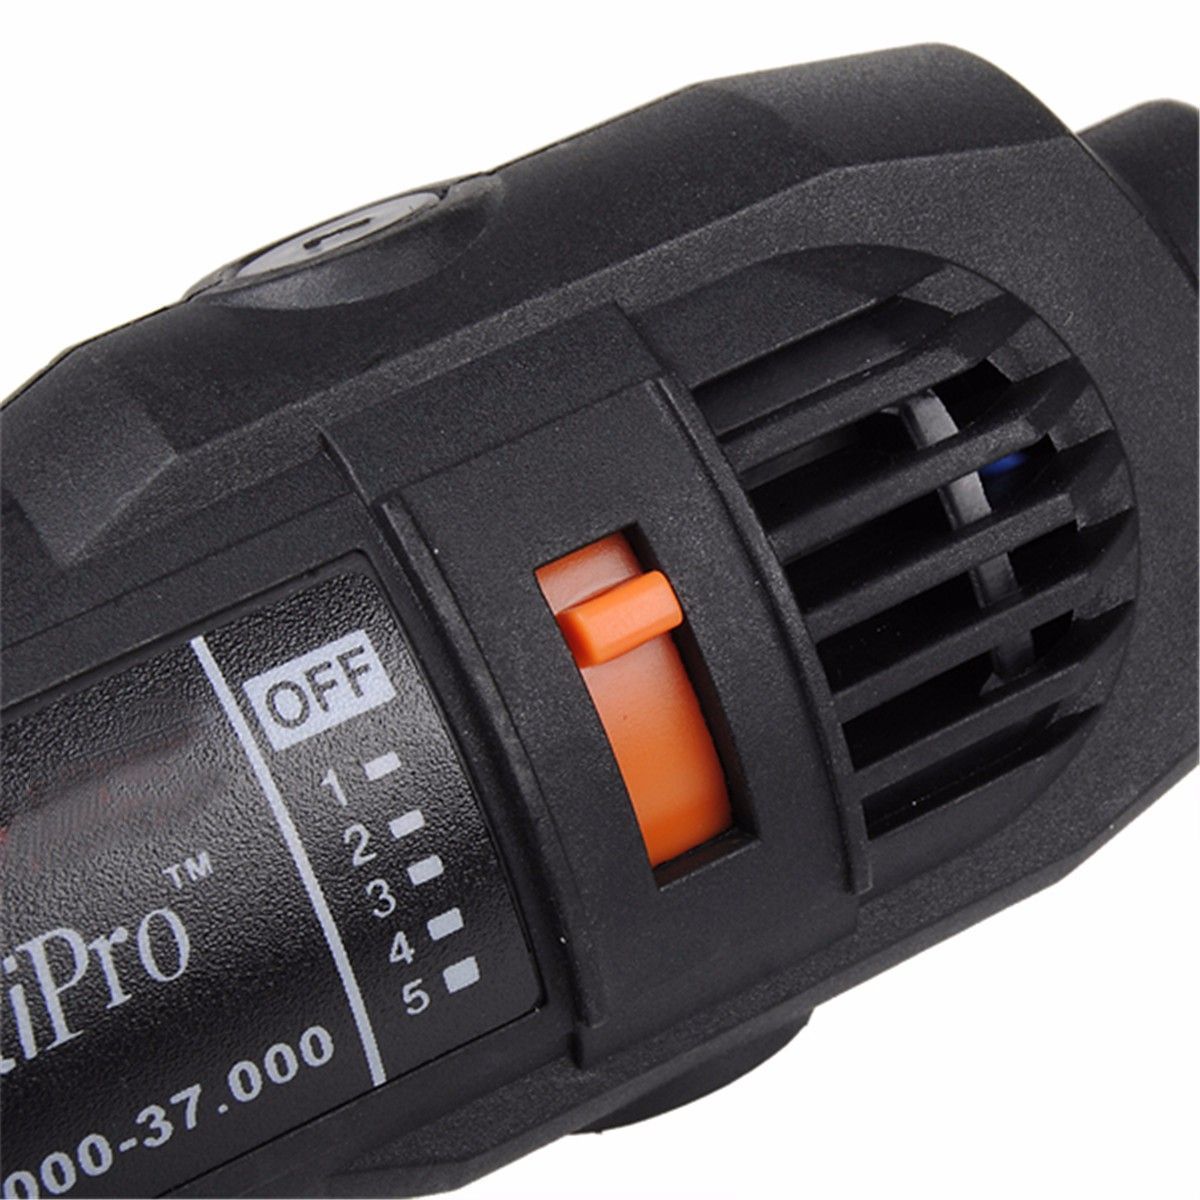 MultiPro-110V-Electric-Grinder-Rotary-Variable-Speed-Power-Tool-1192369